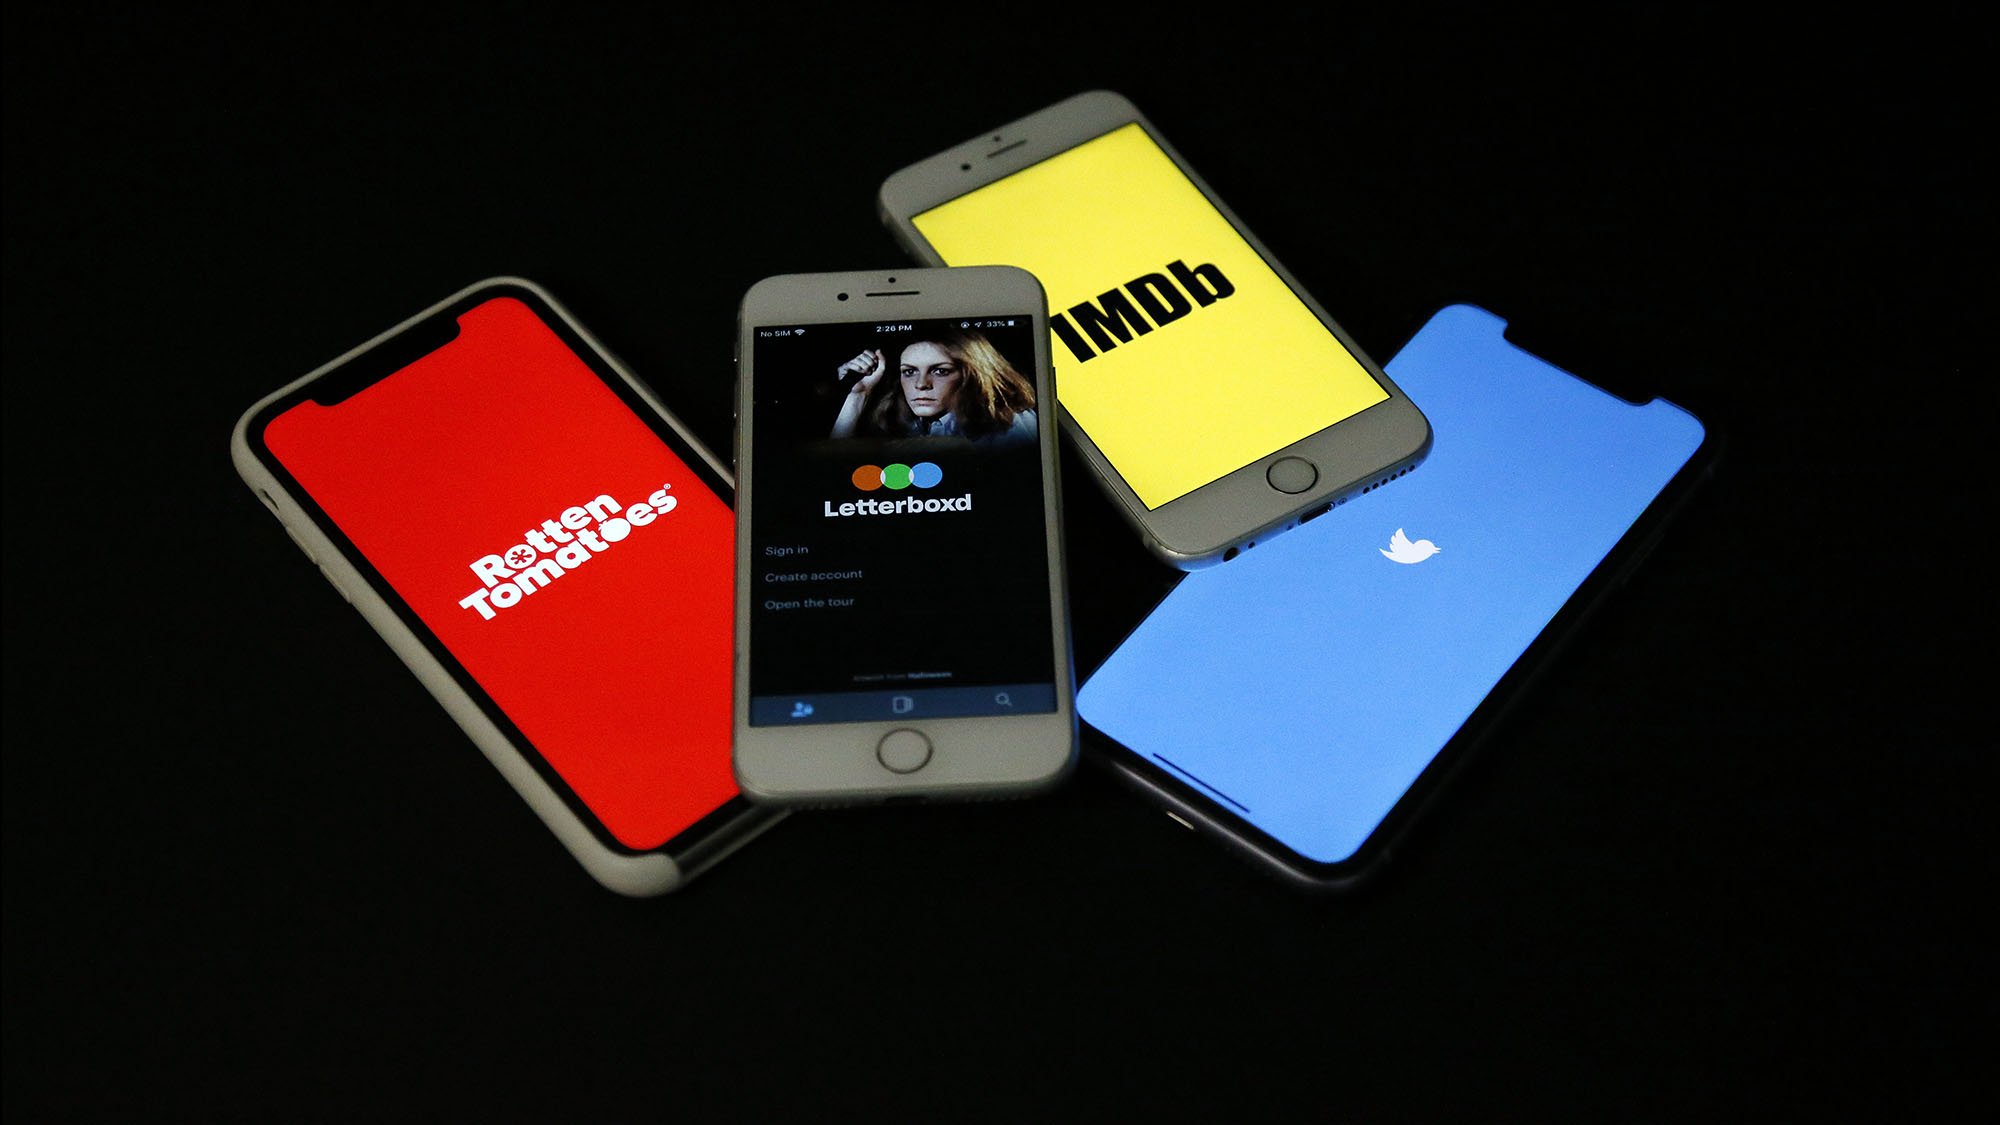 Cellphones show various online movie review sites in this photo illustration.